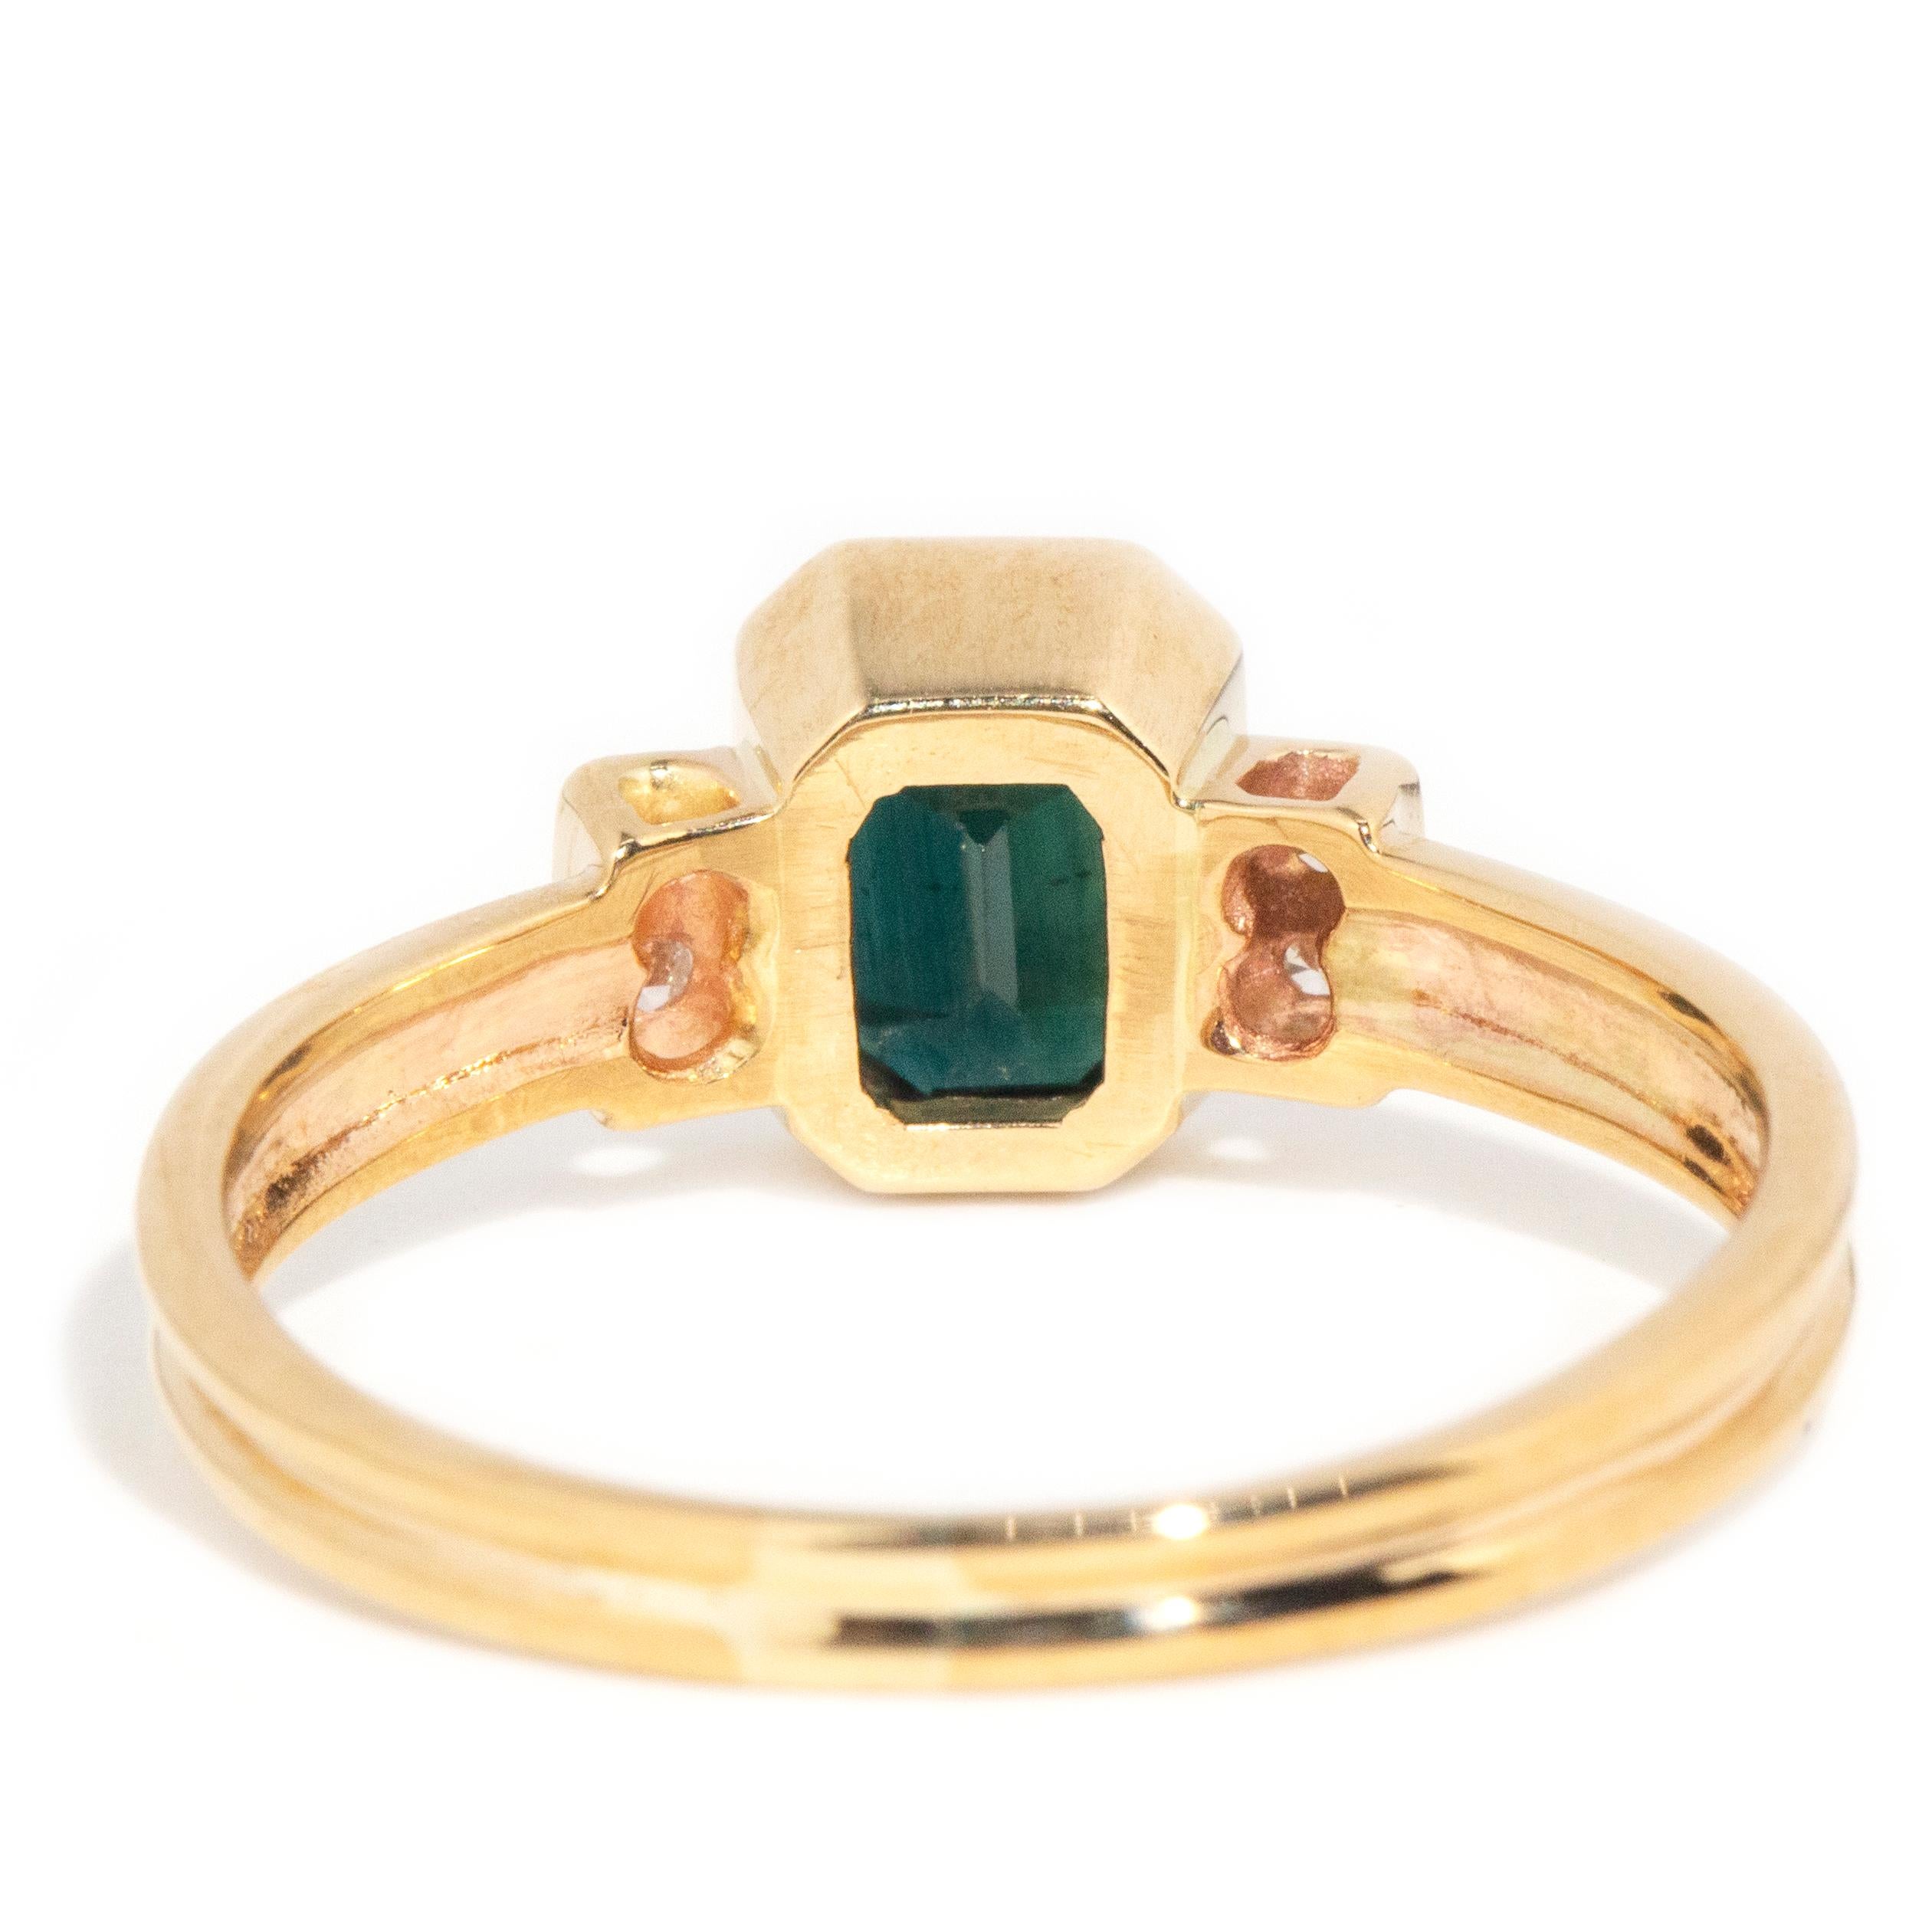 Vintage 1990s 9 Carat Yellow Gold Emerald Cut Teal Sapphire and Diamond Ring 2